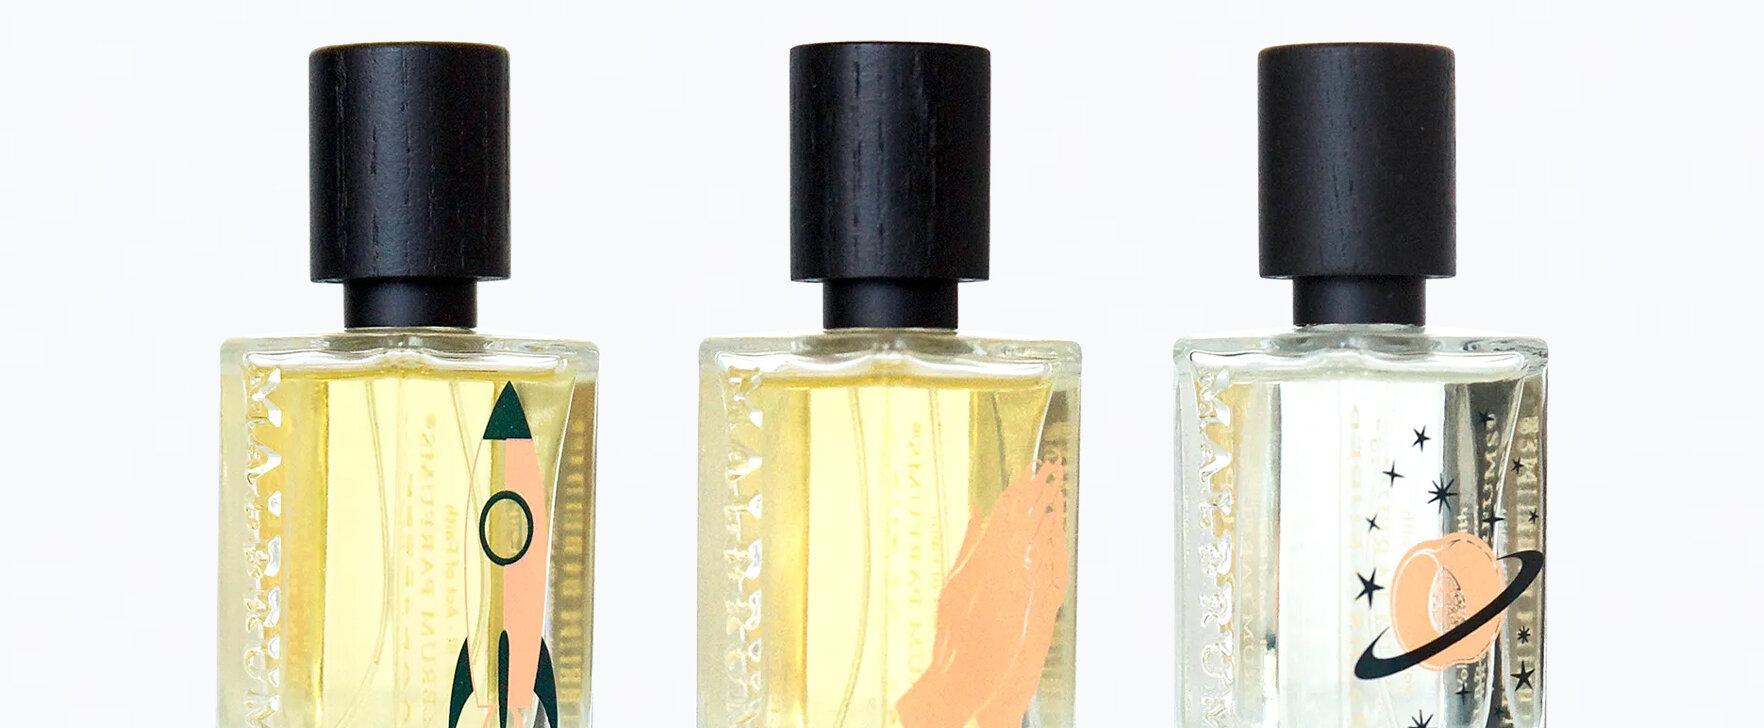 New Trio of Fragrances From Malbrum: The Volume III - Act of Faith Collection